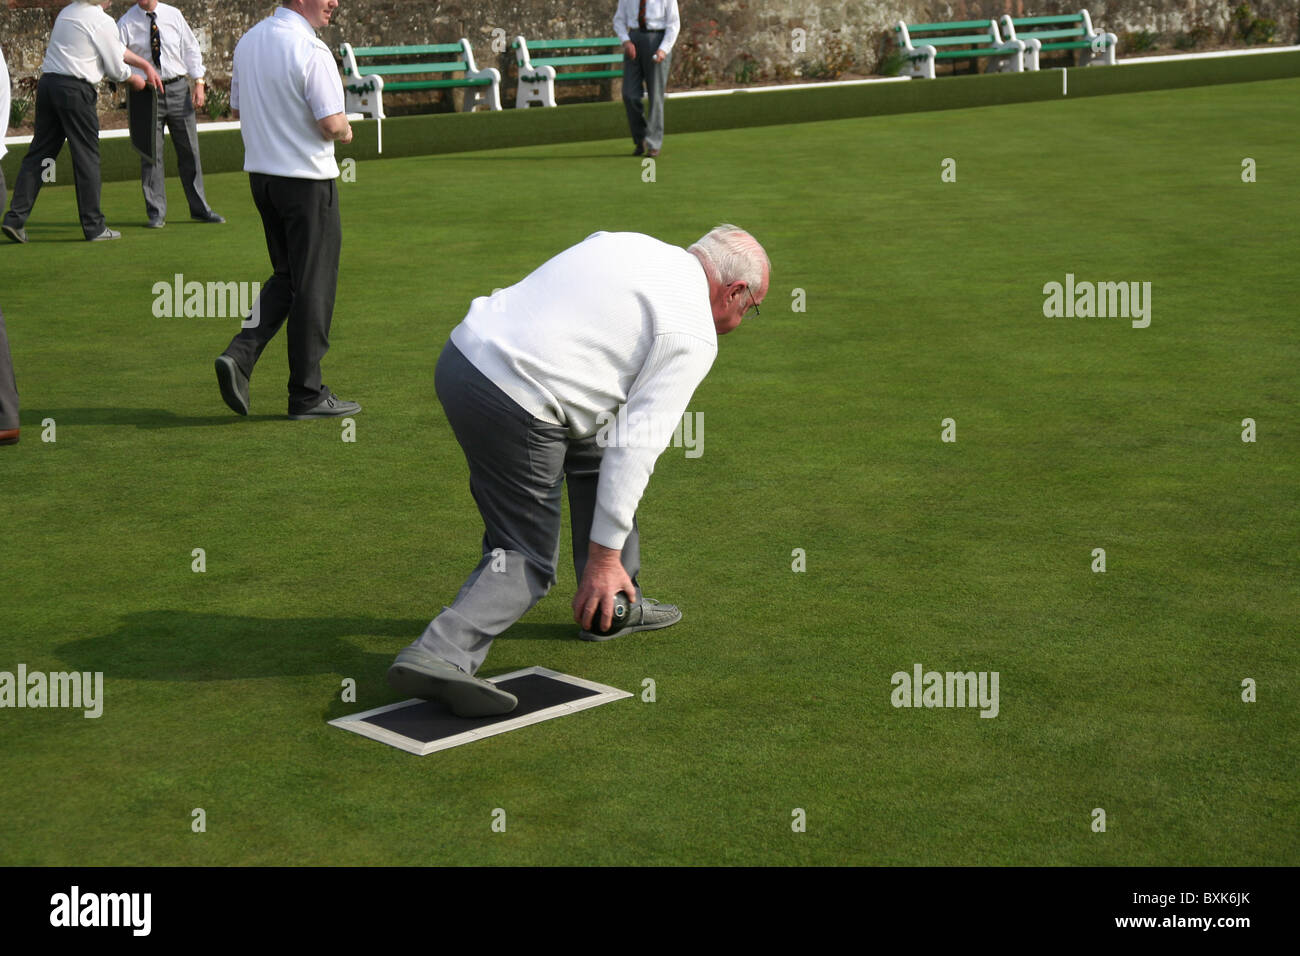 Senior man about to roll a bowl in a Lawn Bowling game Stock Photo